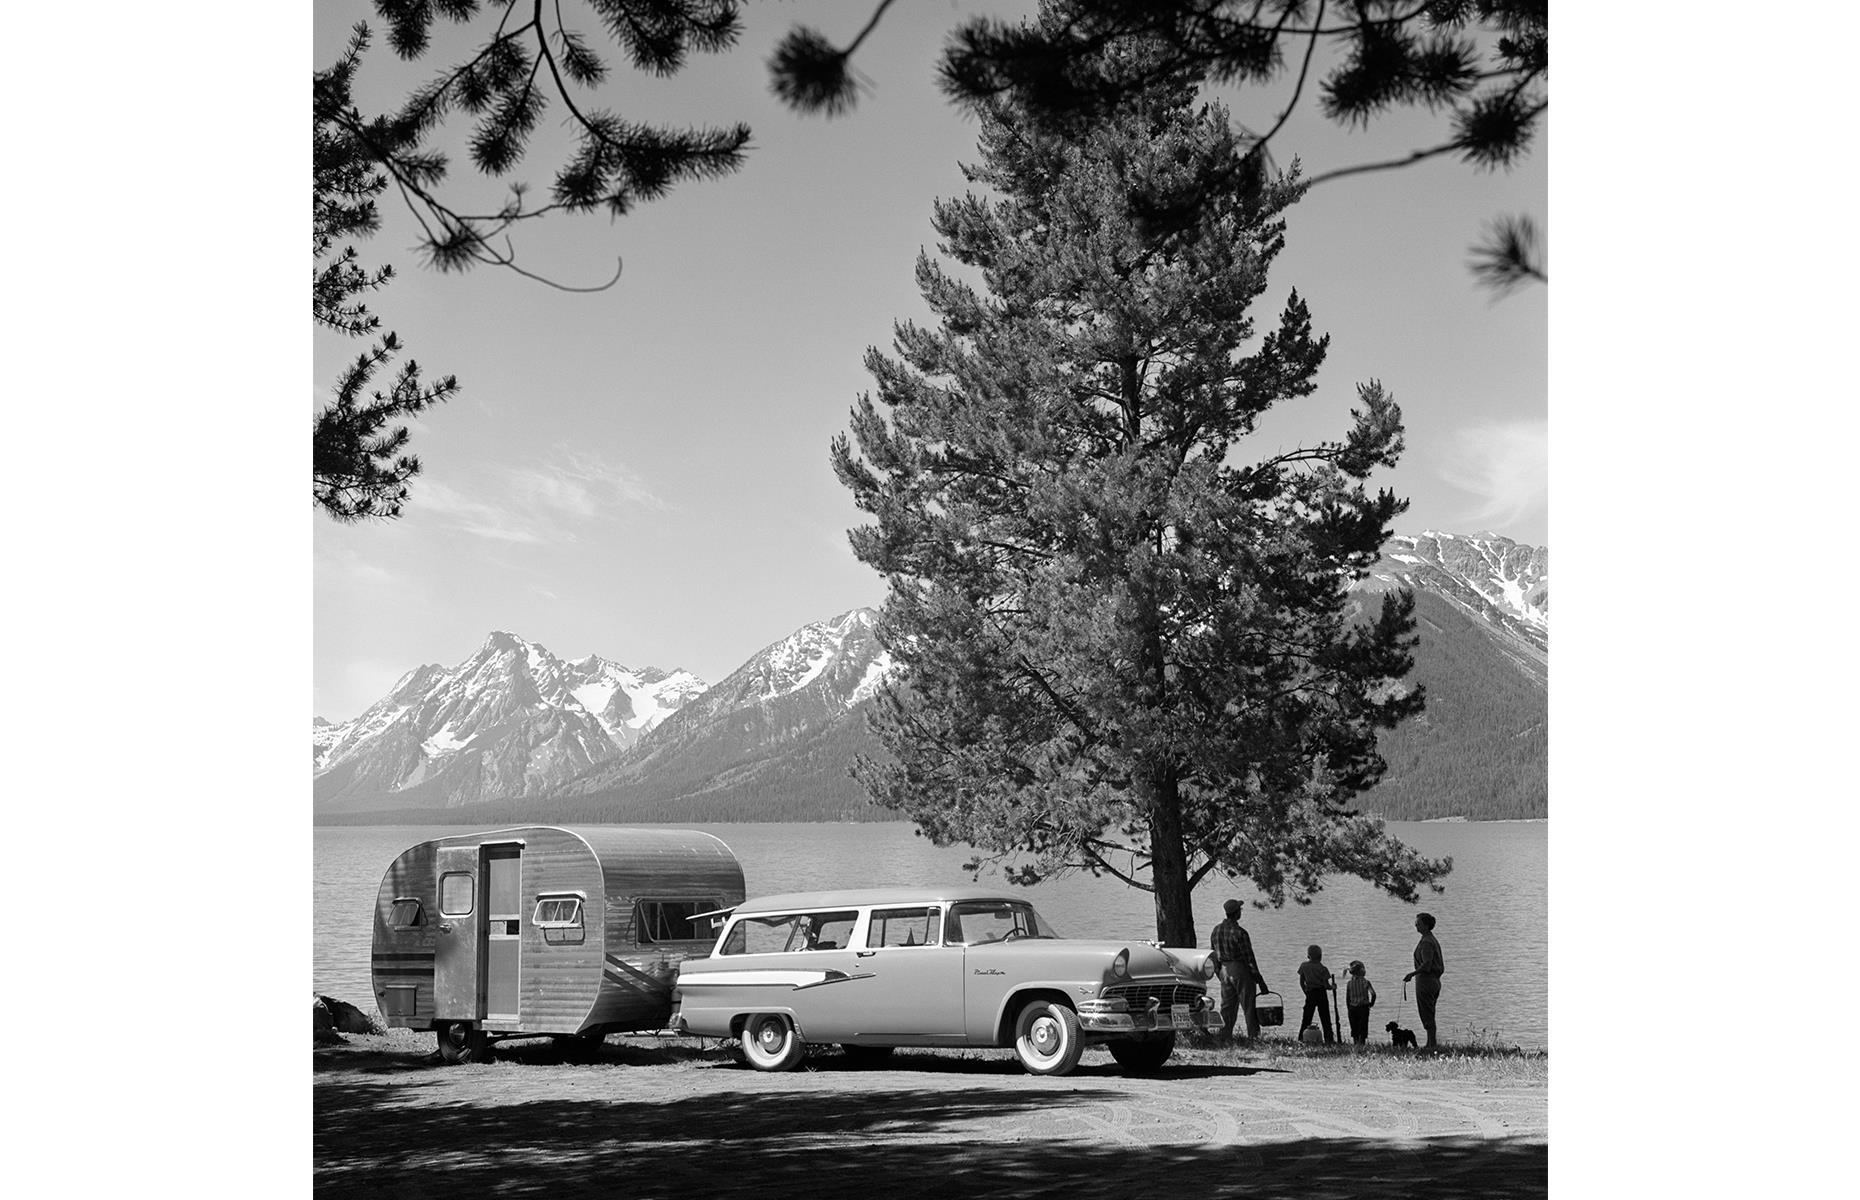 <p>America's national parks have also long served as summer vacation spots for adventurous travelers. This family, photographed in the 1950s, have parked up their trailer in a wonderfully scenic spot in Grand Teton National Park. They look out across Jackson Lake, the mighty Teton range jutting towards the sky. </p>  <p><strong><a href="https://www.loveexploring.com/galleries/107668/historic-photos-of-americas-national-parks?page=1">See more vintage photos of America's national parks</a></strong></p>